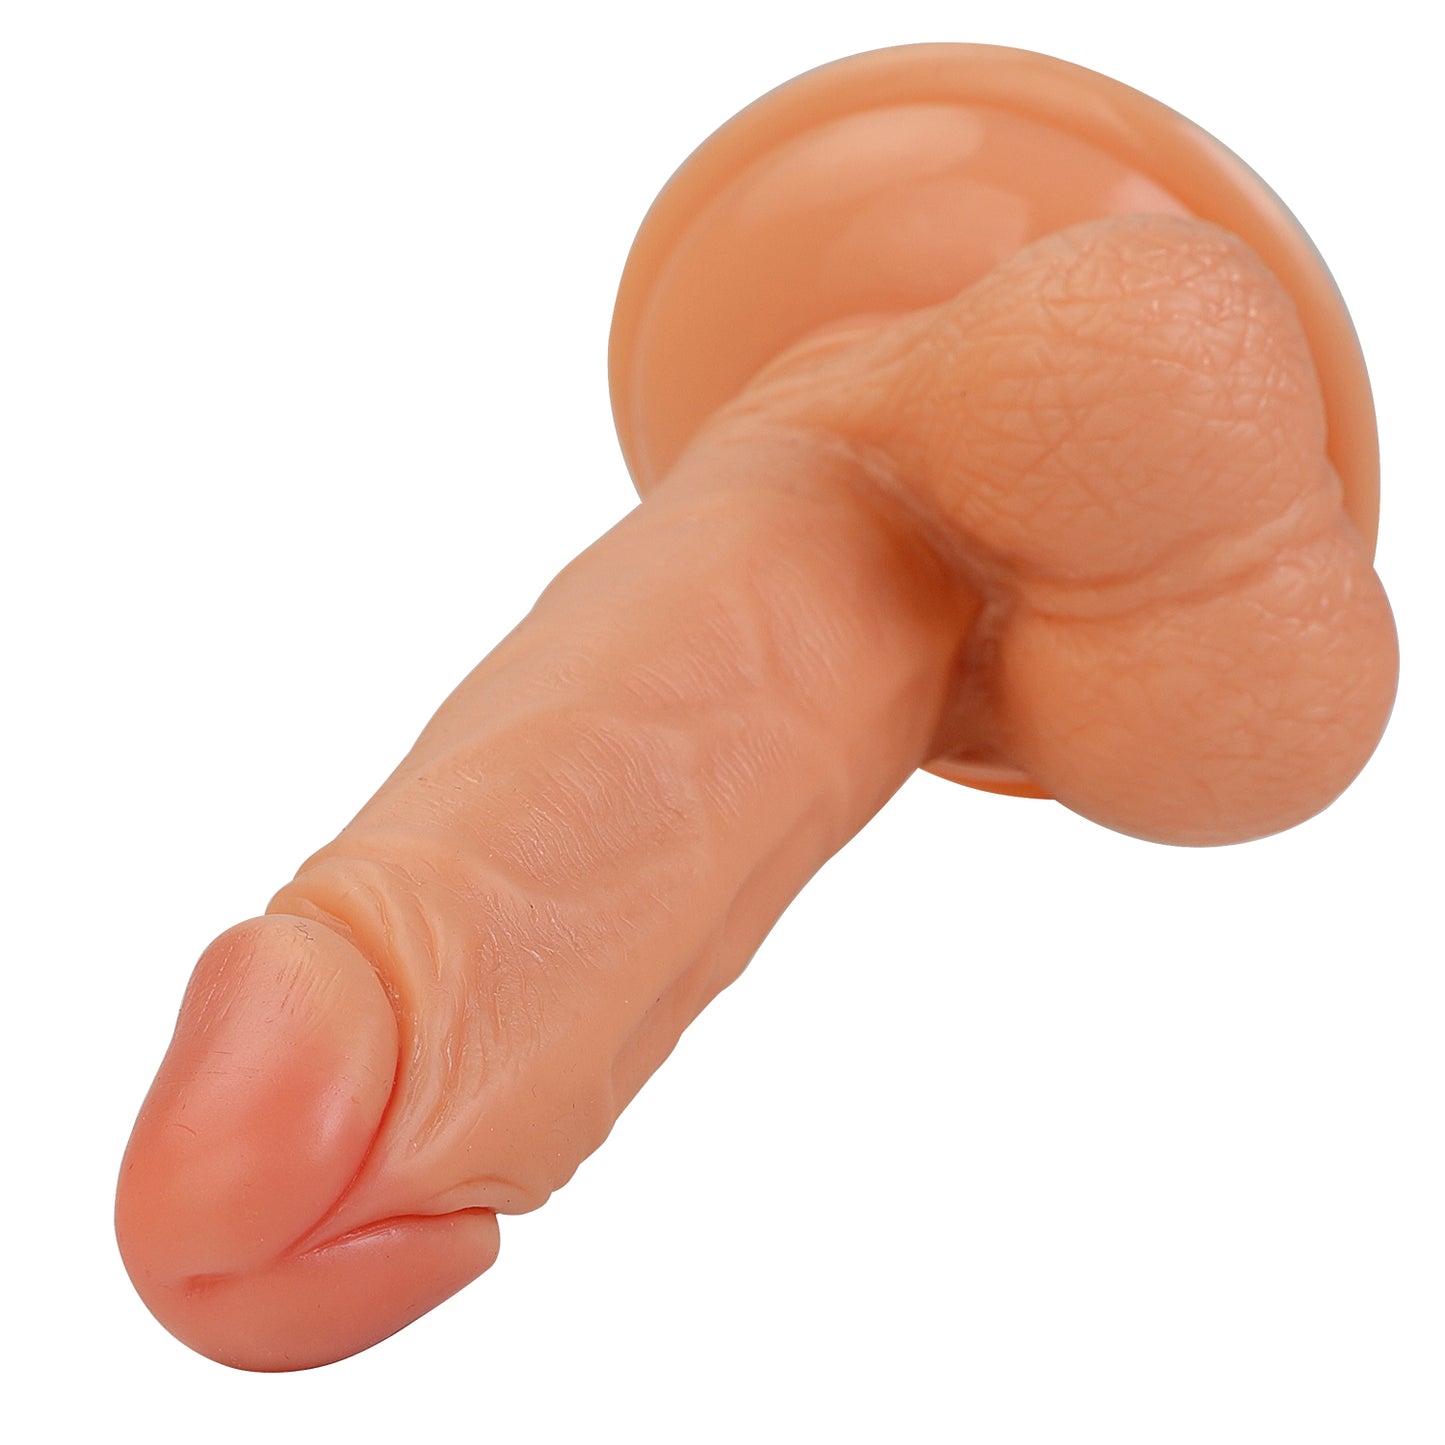 6 Inch Suction Cup Dildo